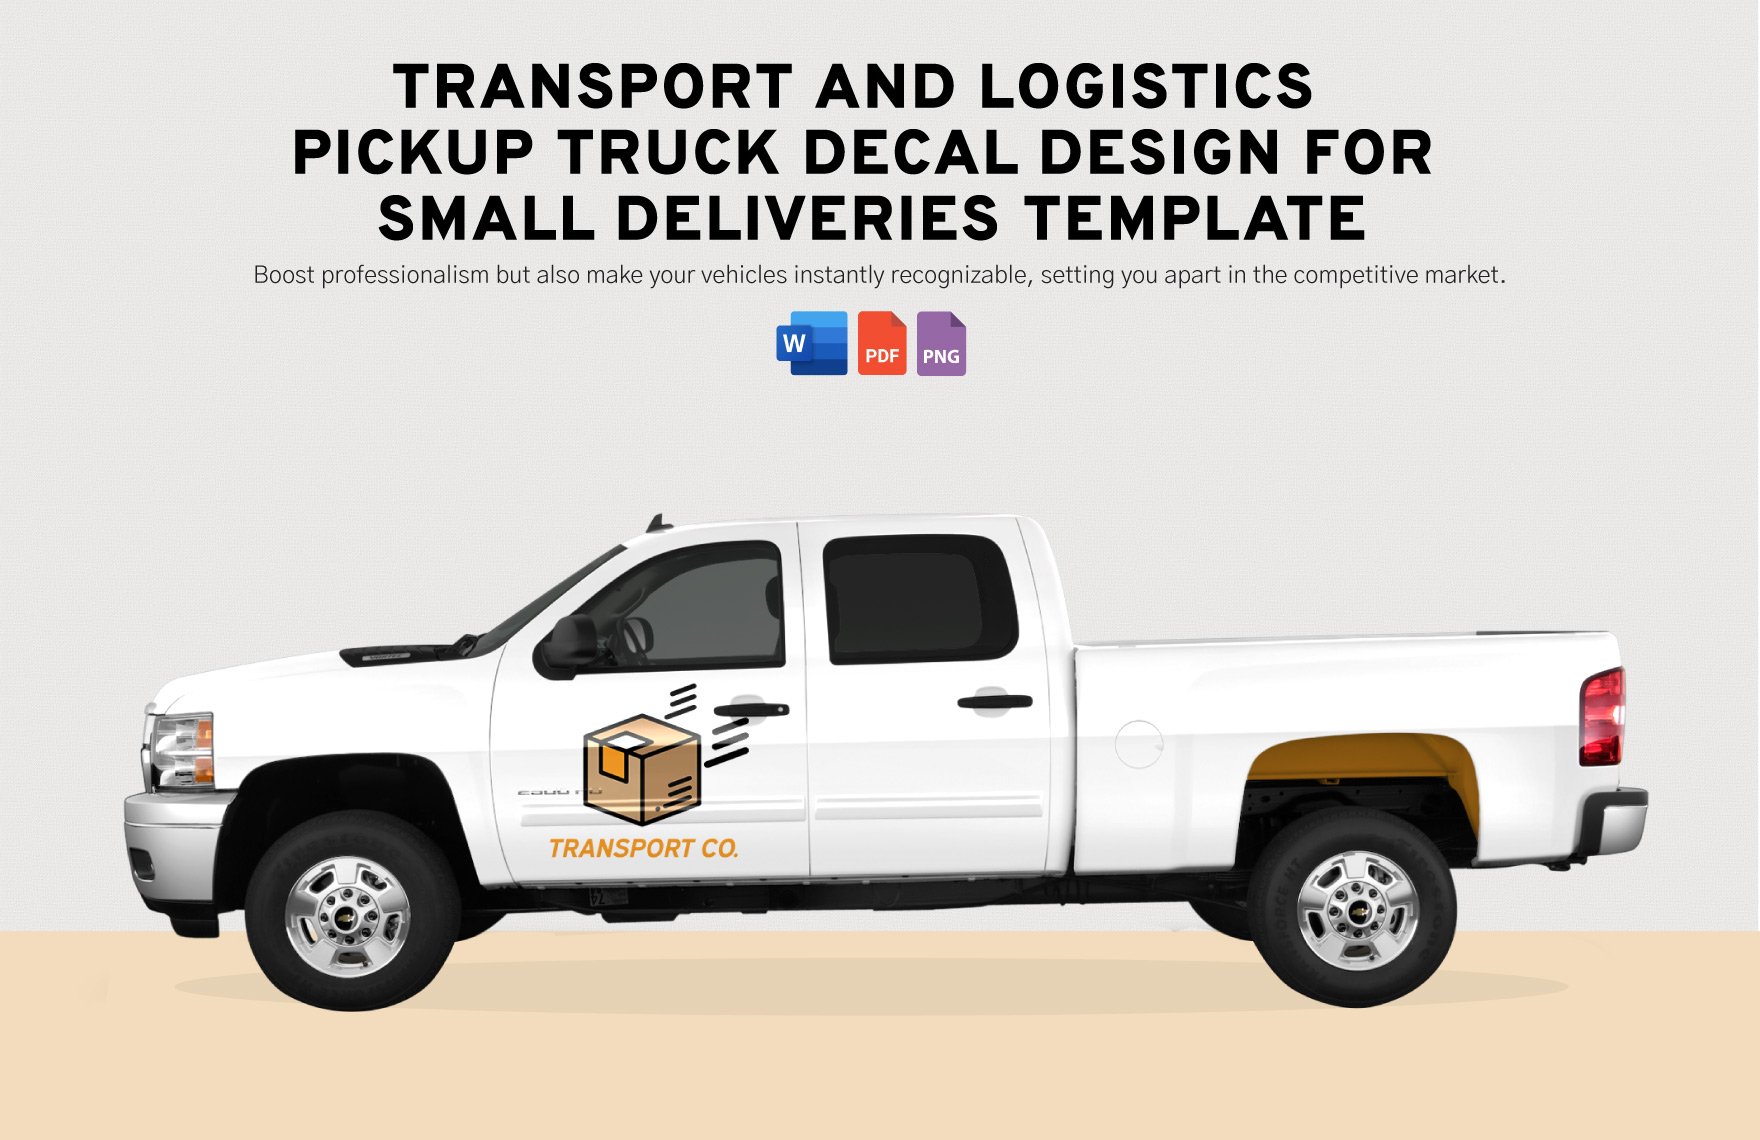 Transport and Logistics Pickup Truck Decal Design for Small Deliveries Template